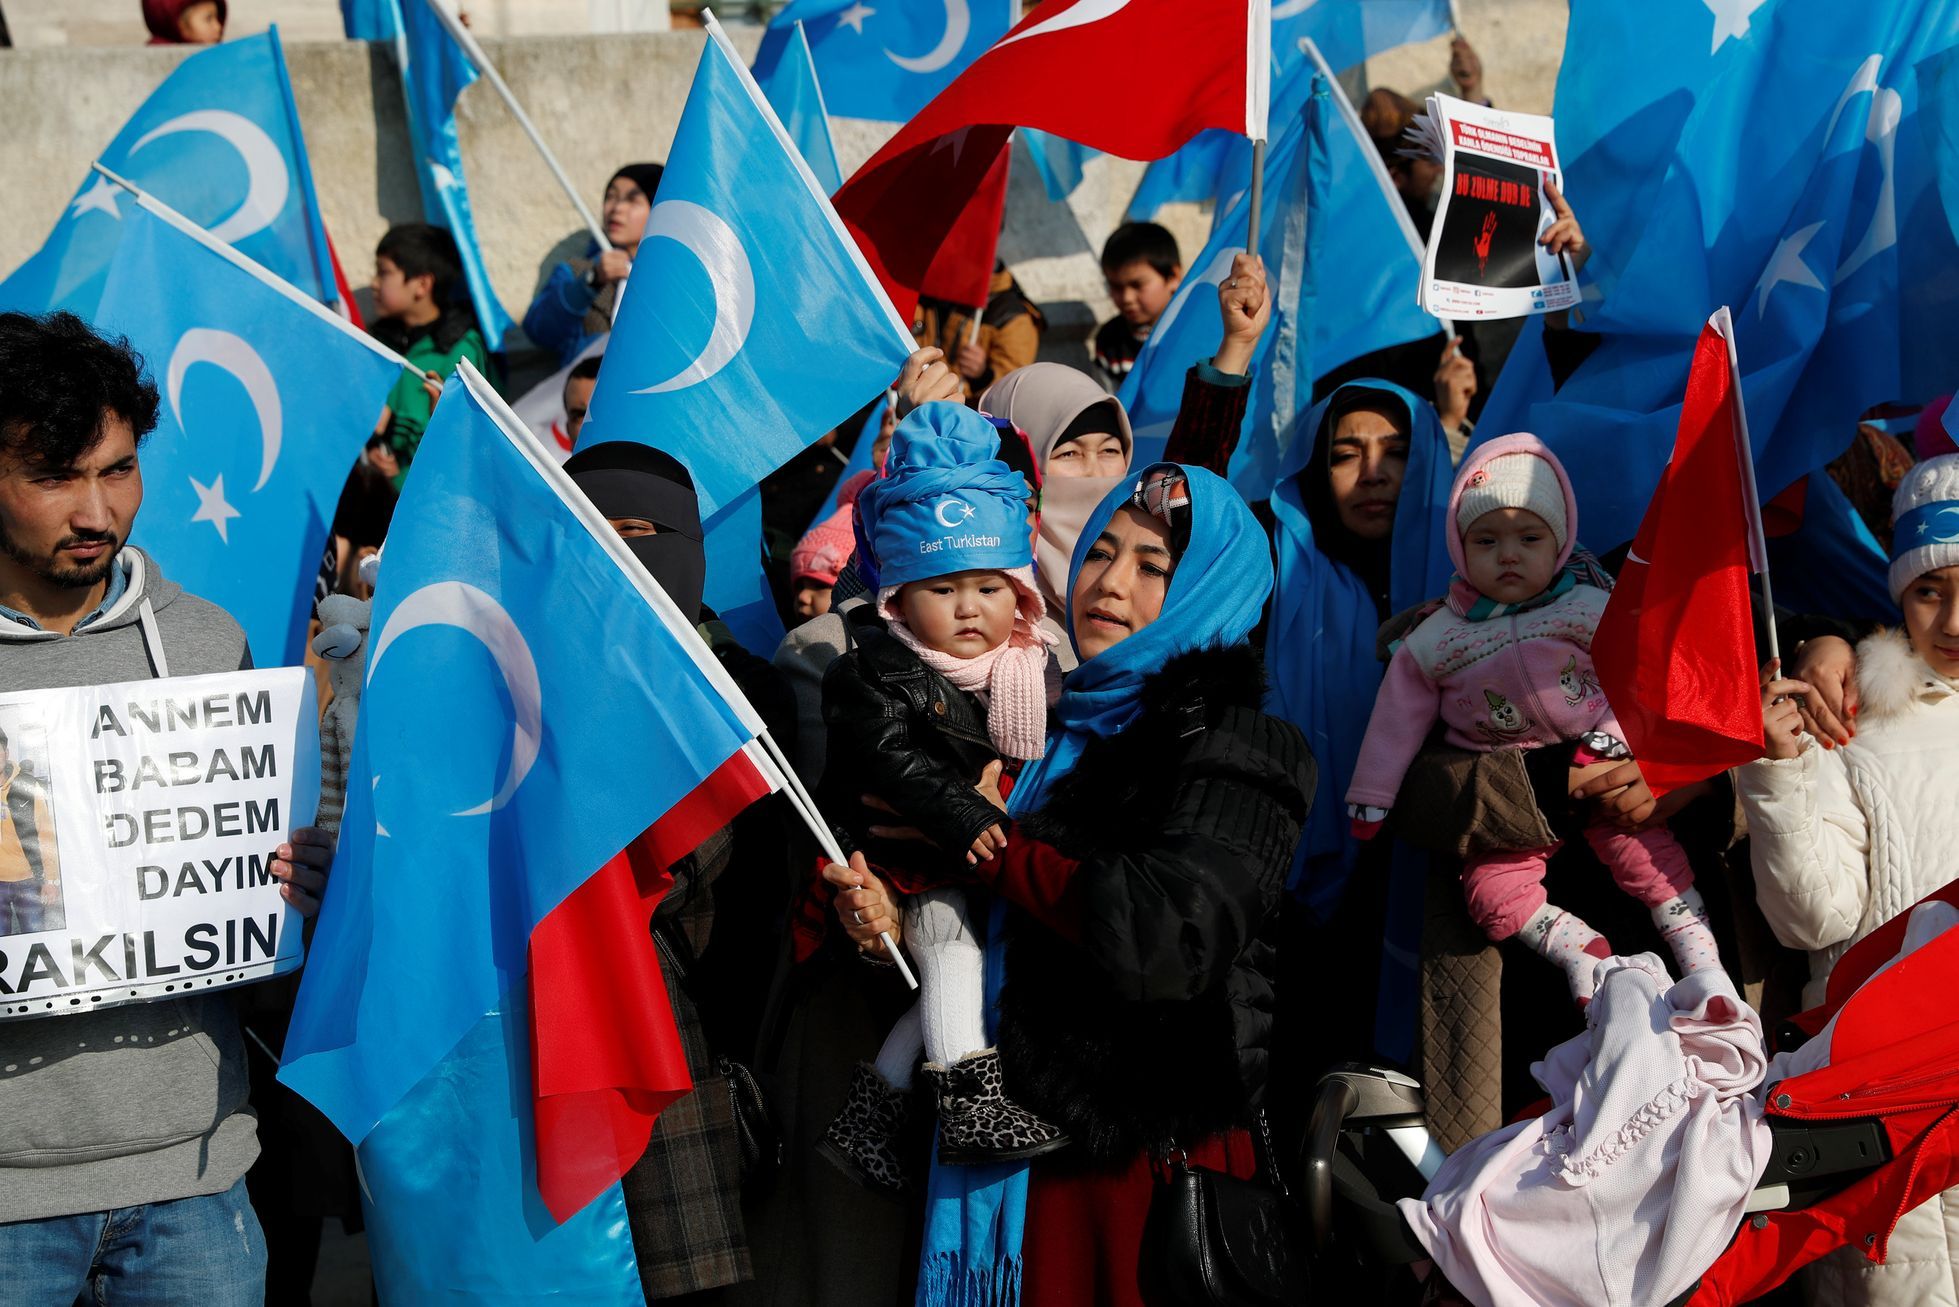 A data leak from Shanghai reveals Uyghurs and foreigners’ surveillance by the Communist government